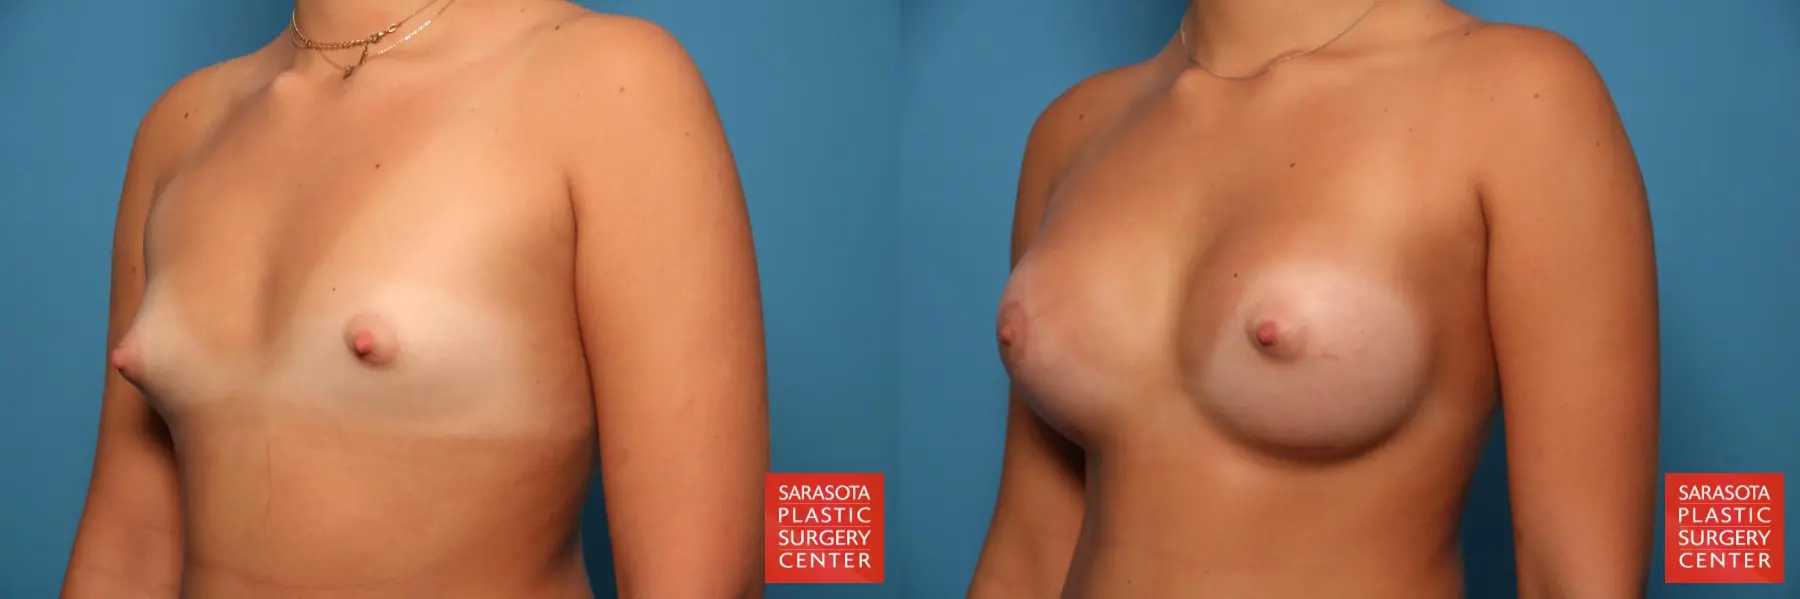 Breast Asymmetry: Patient 1 - Before and After 2